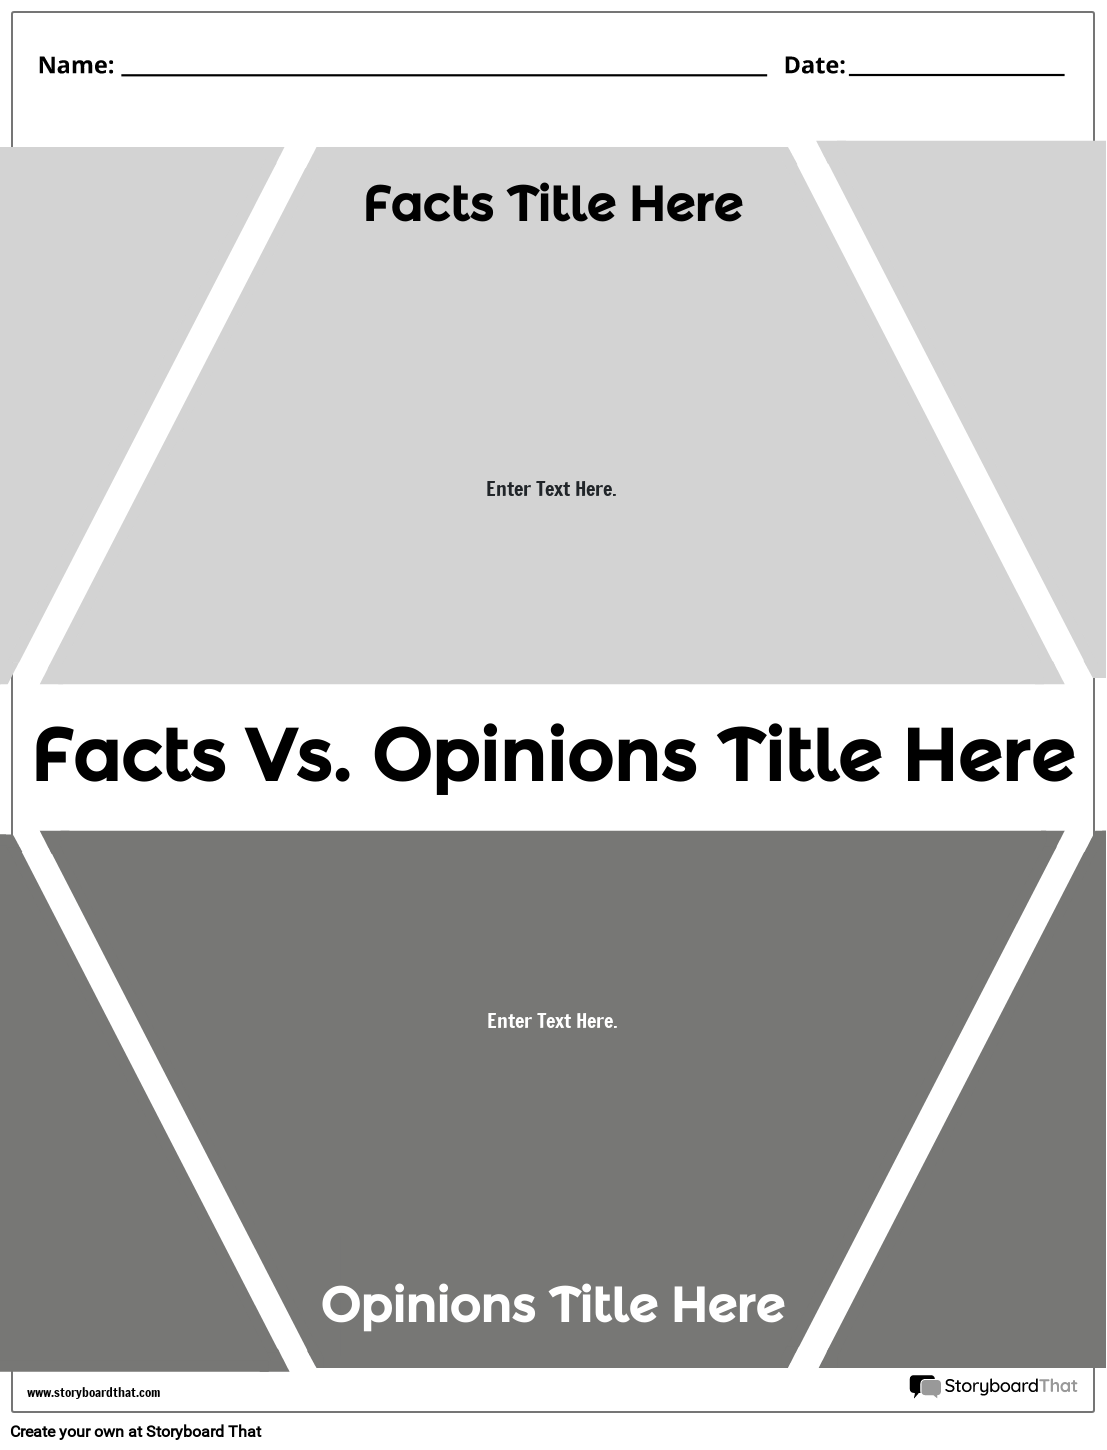 New Create Page Fact vs. Opinion Template 3 (Black & White)